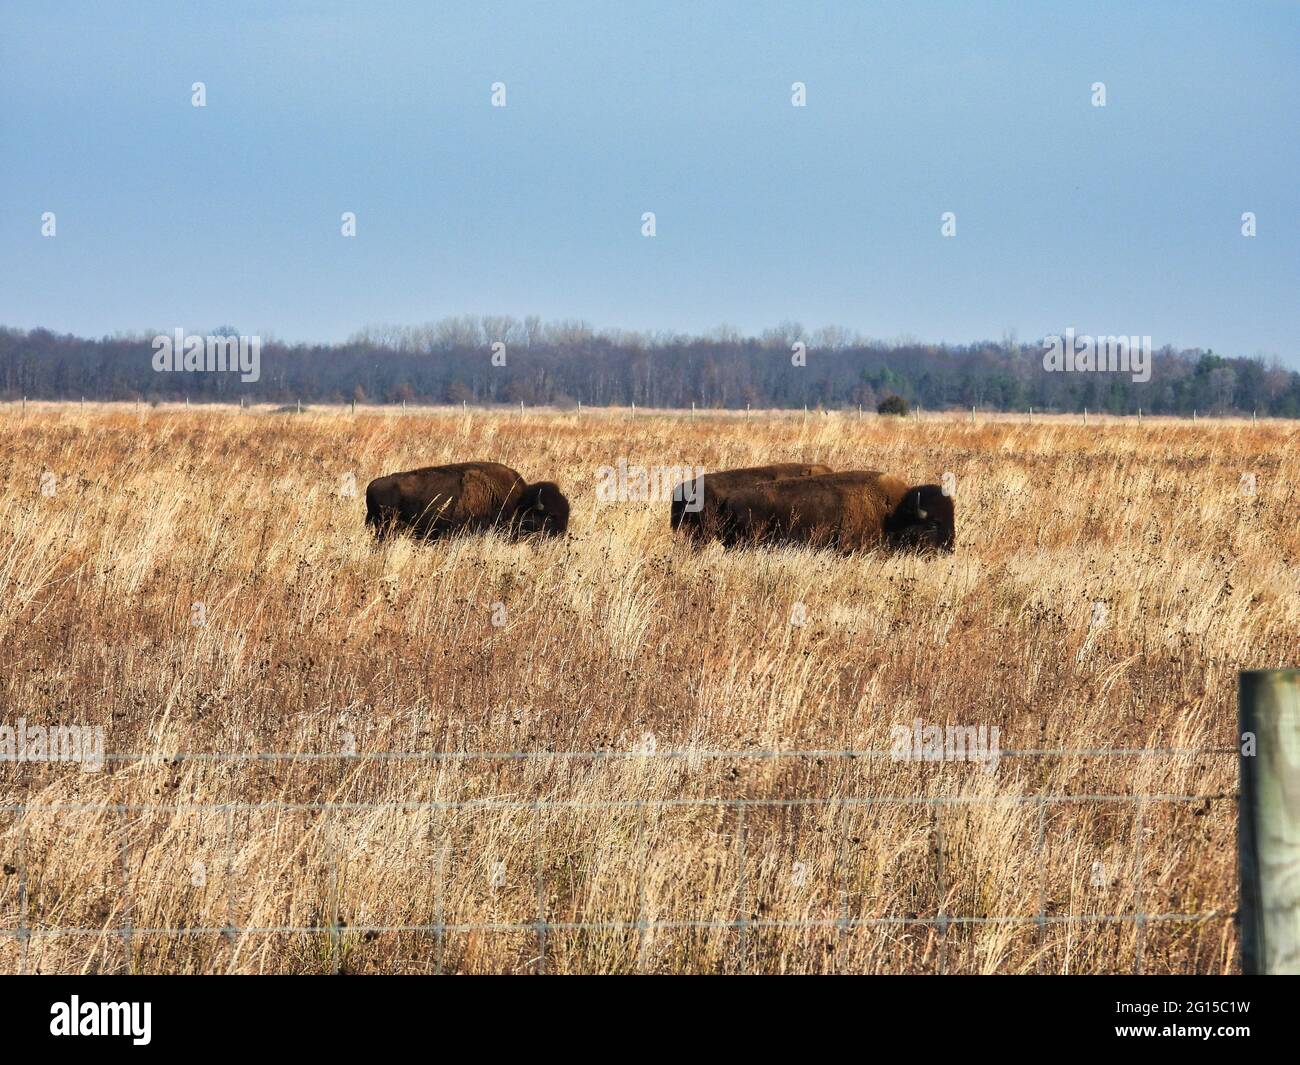 Bisons Grazing in a Field: Two American buffalos graze in a fall prairie field on a sunny fall day with a clear sky in the background Stock Photo